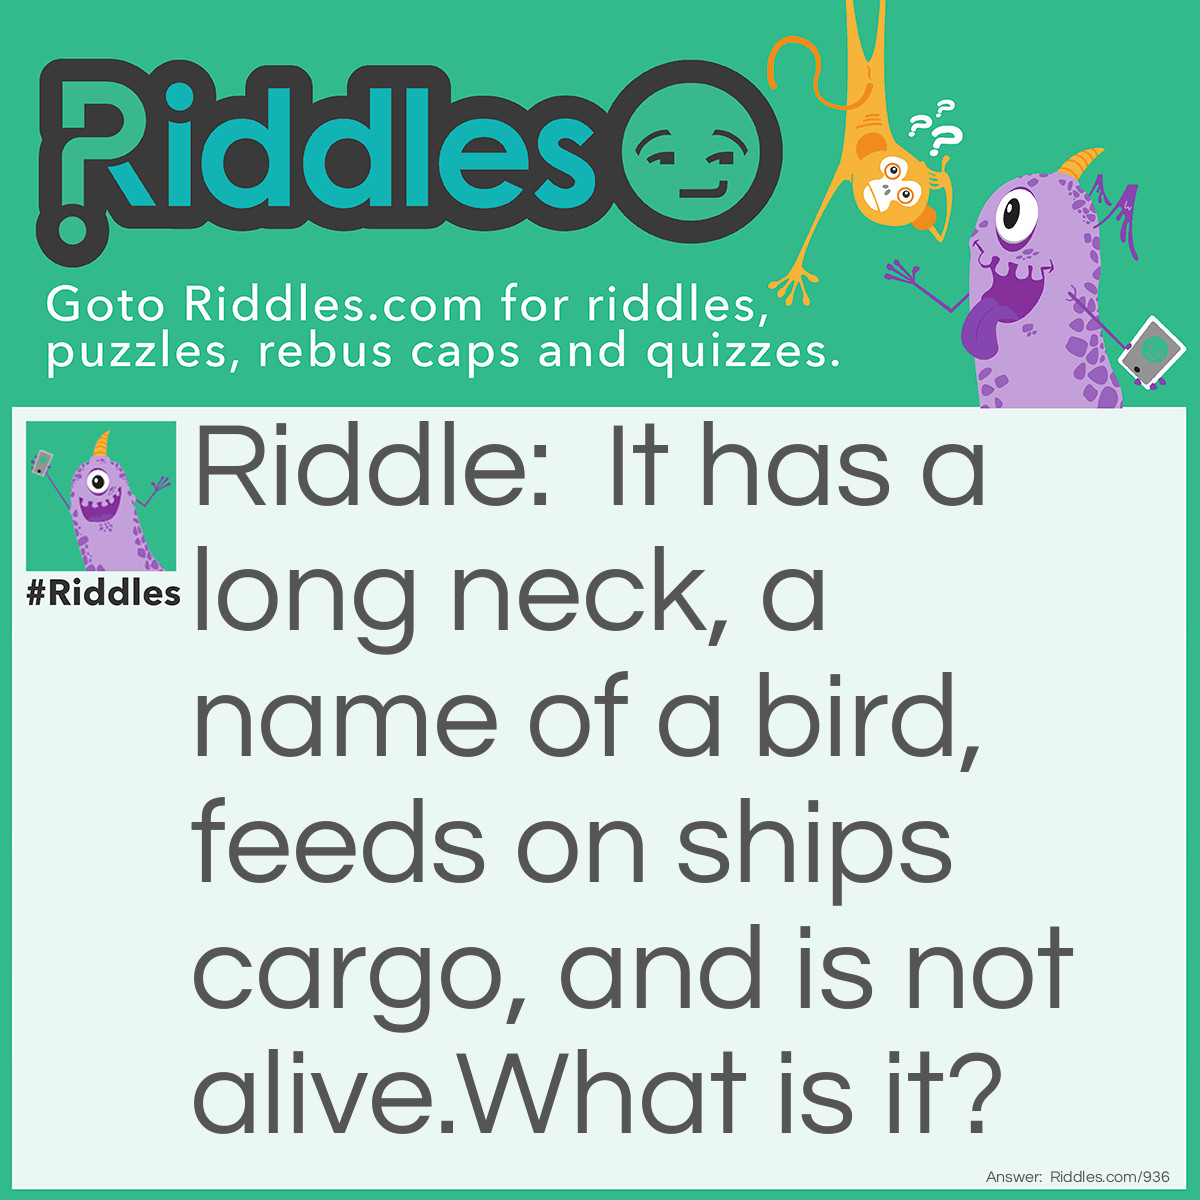 Riddle: It has a long neck, a name of a bird, feeds on ships' cargo, and is not alive.  
What is it? Answer: A crane.